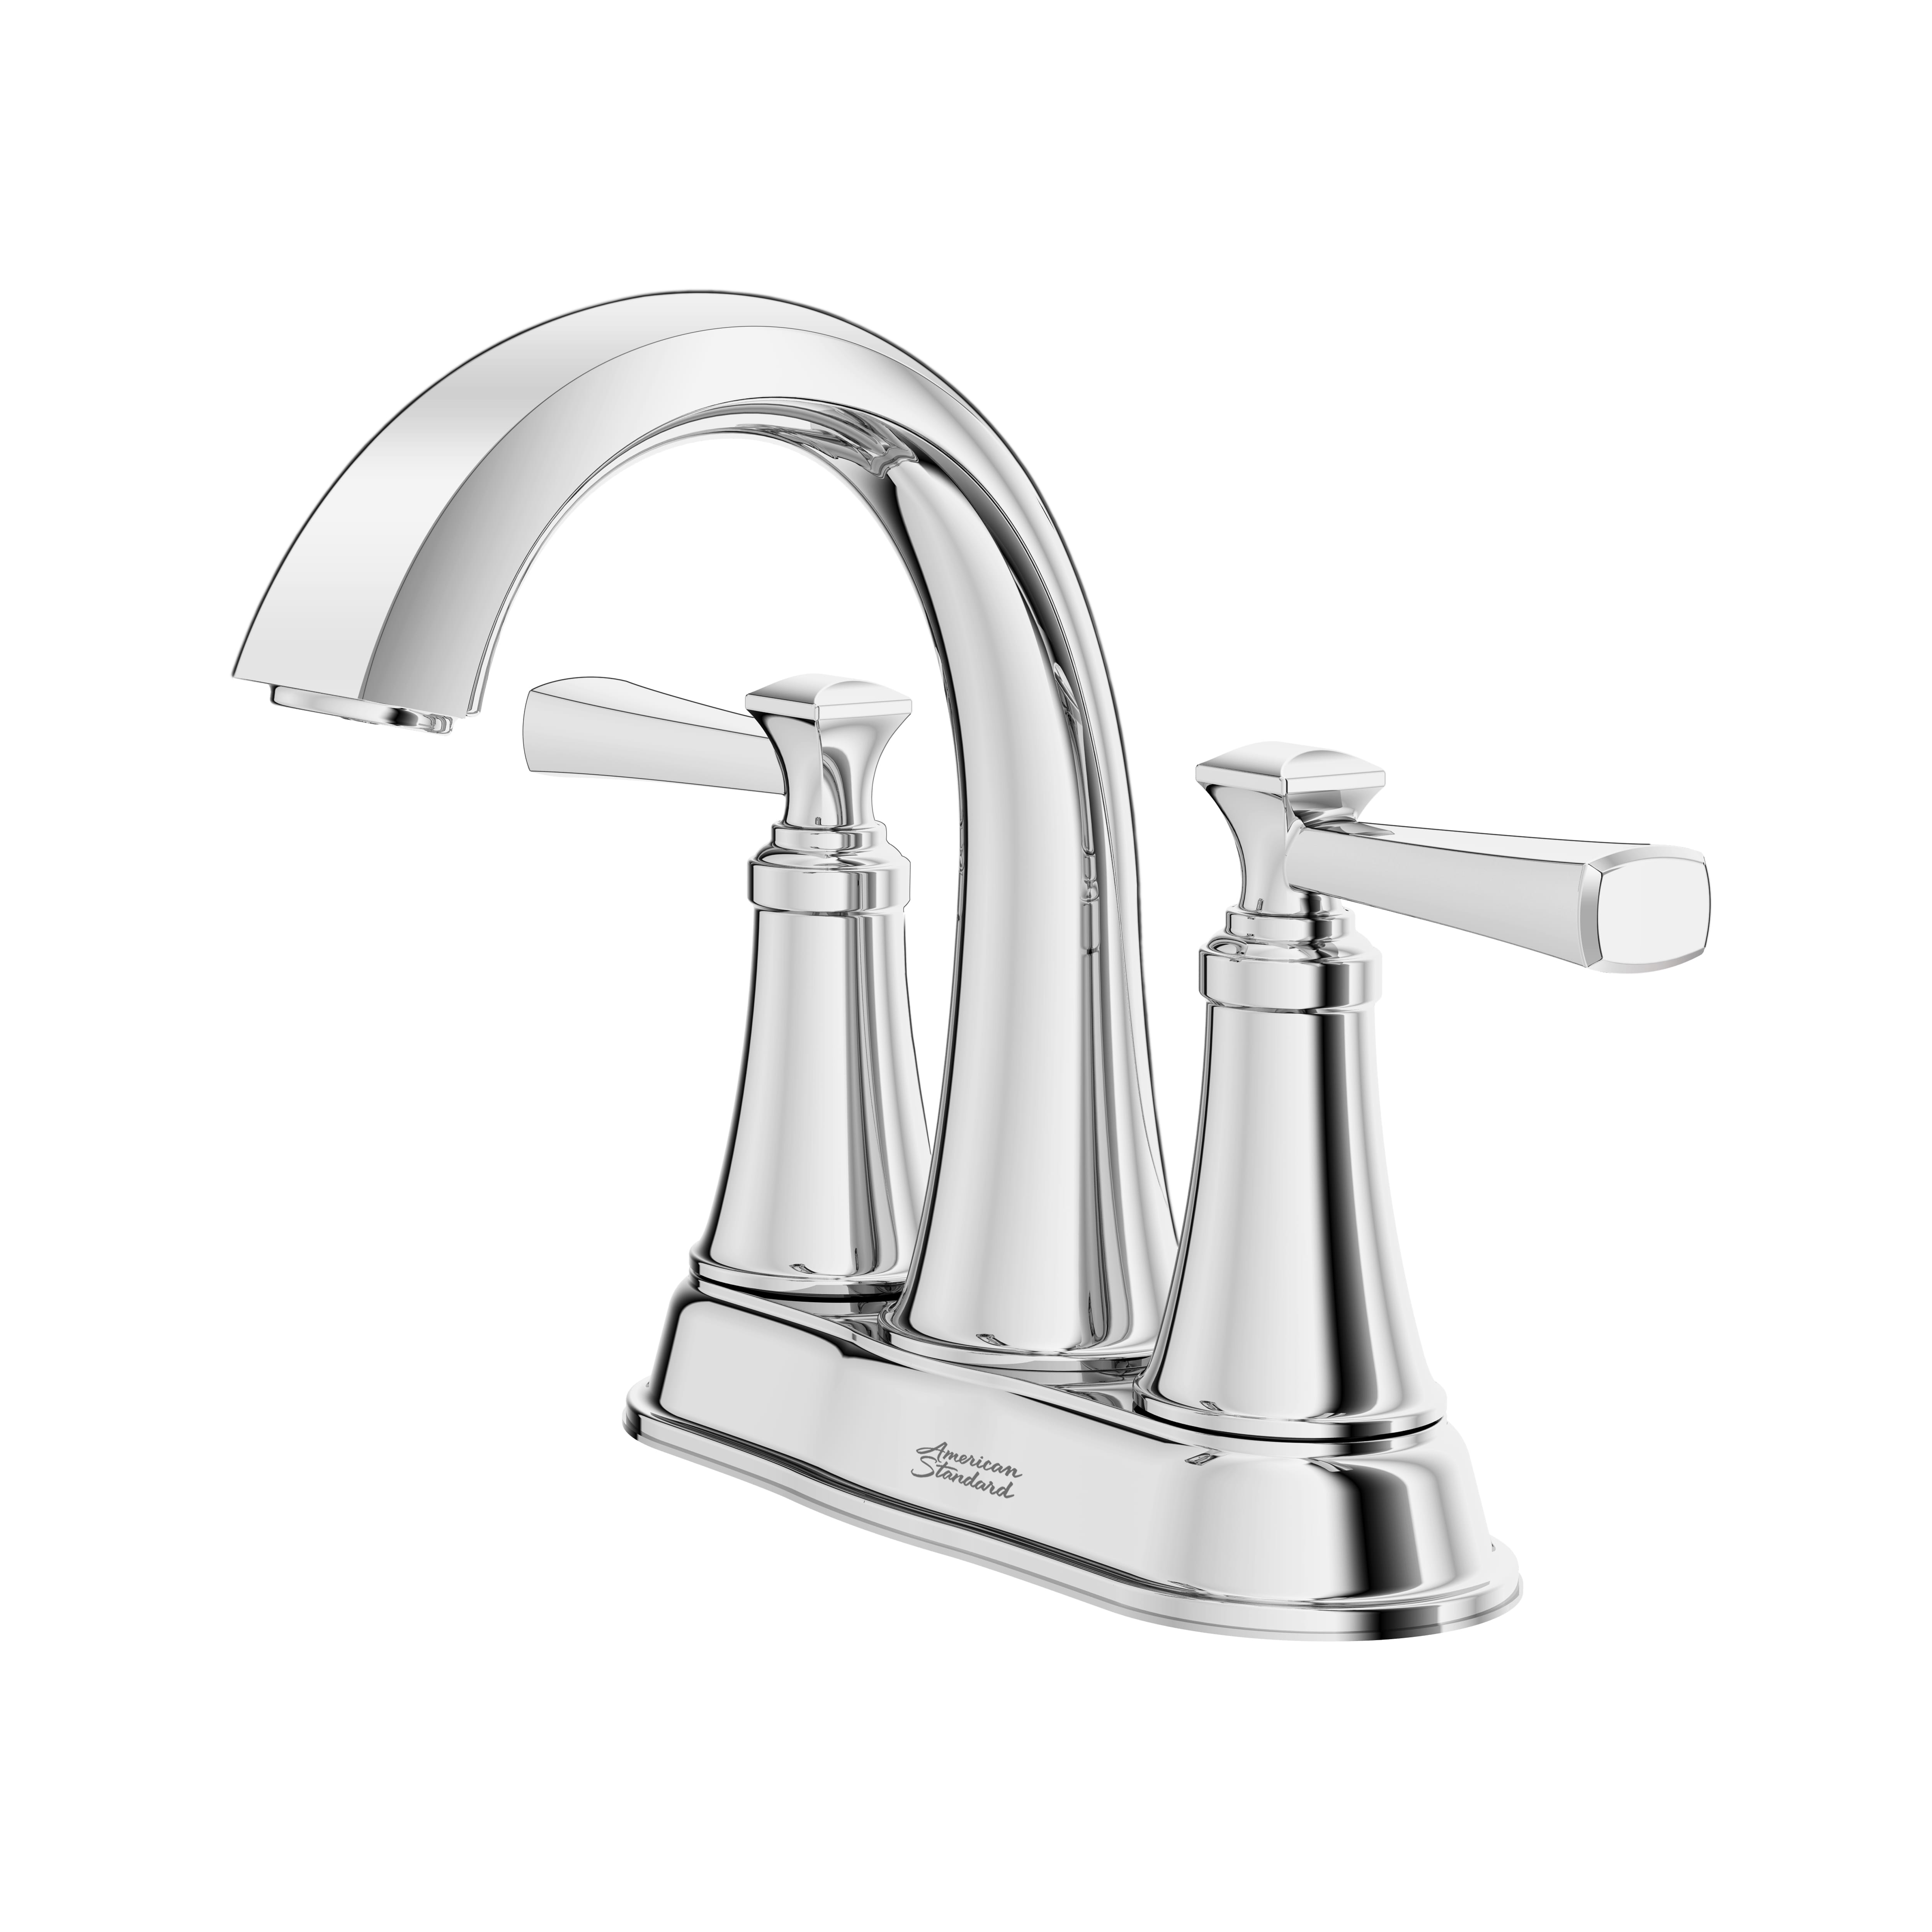 Rumson 4 In Centerset 2 Handle Bathroom Faucet 12 GPM with Lever Handles POLISHED CHROME